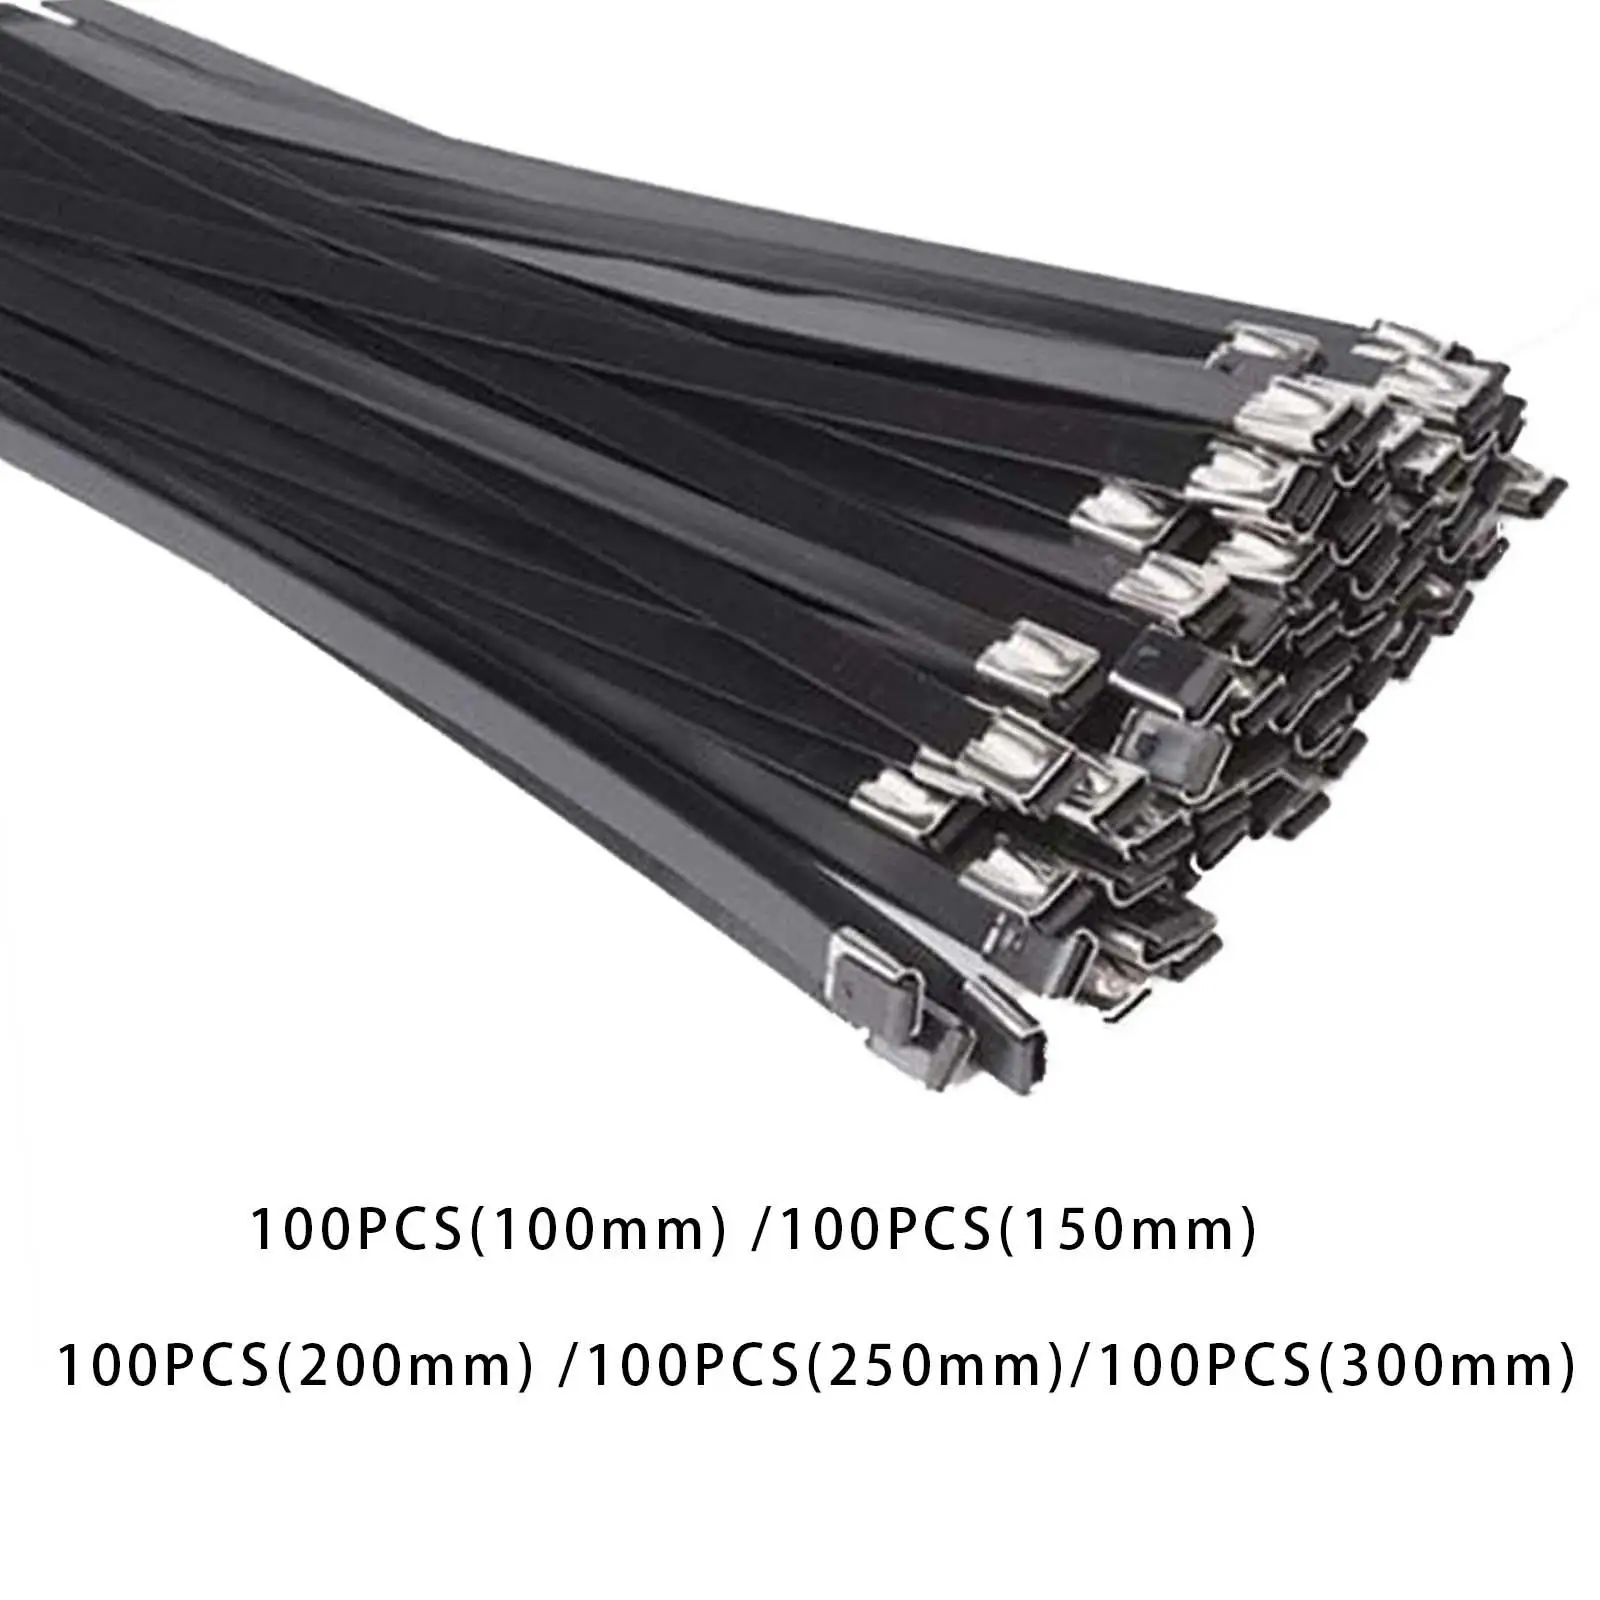 100Pcs 304 Stainless Steel Cable Ties Wrap Coated Sturdy Practical Heavy Duty Accessories Black Color Versatile for Farms Pipes